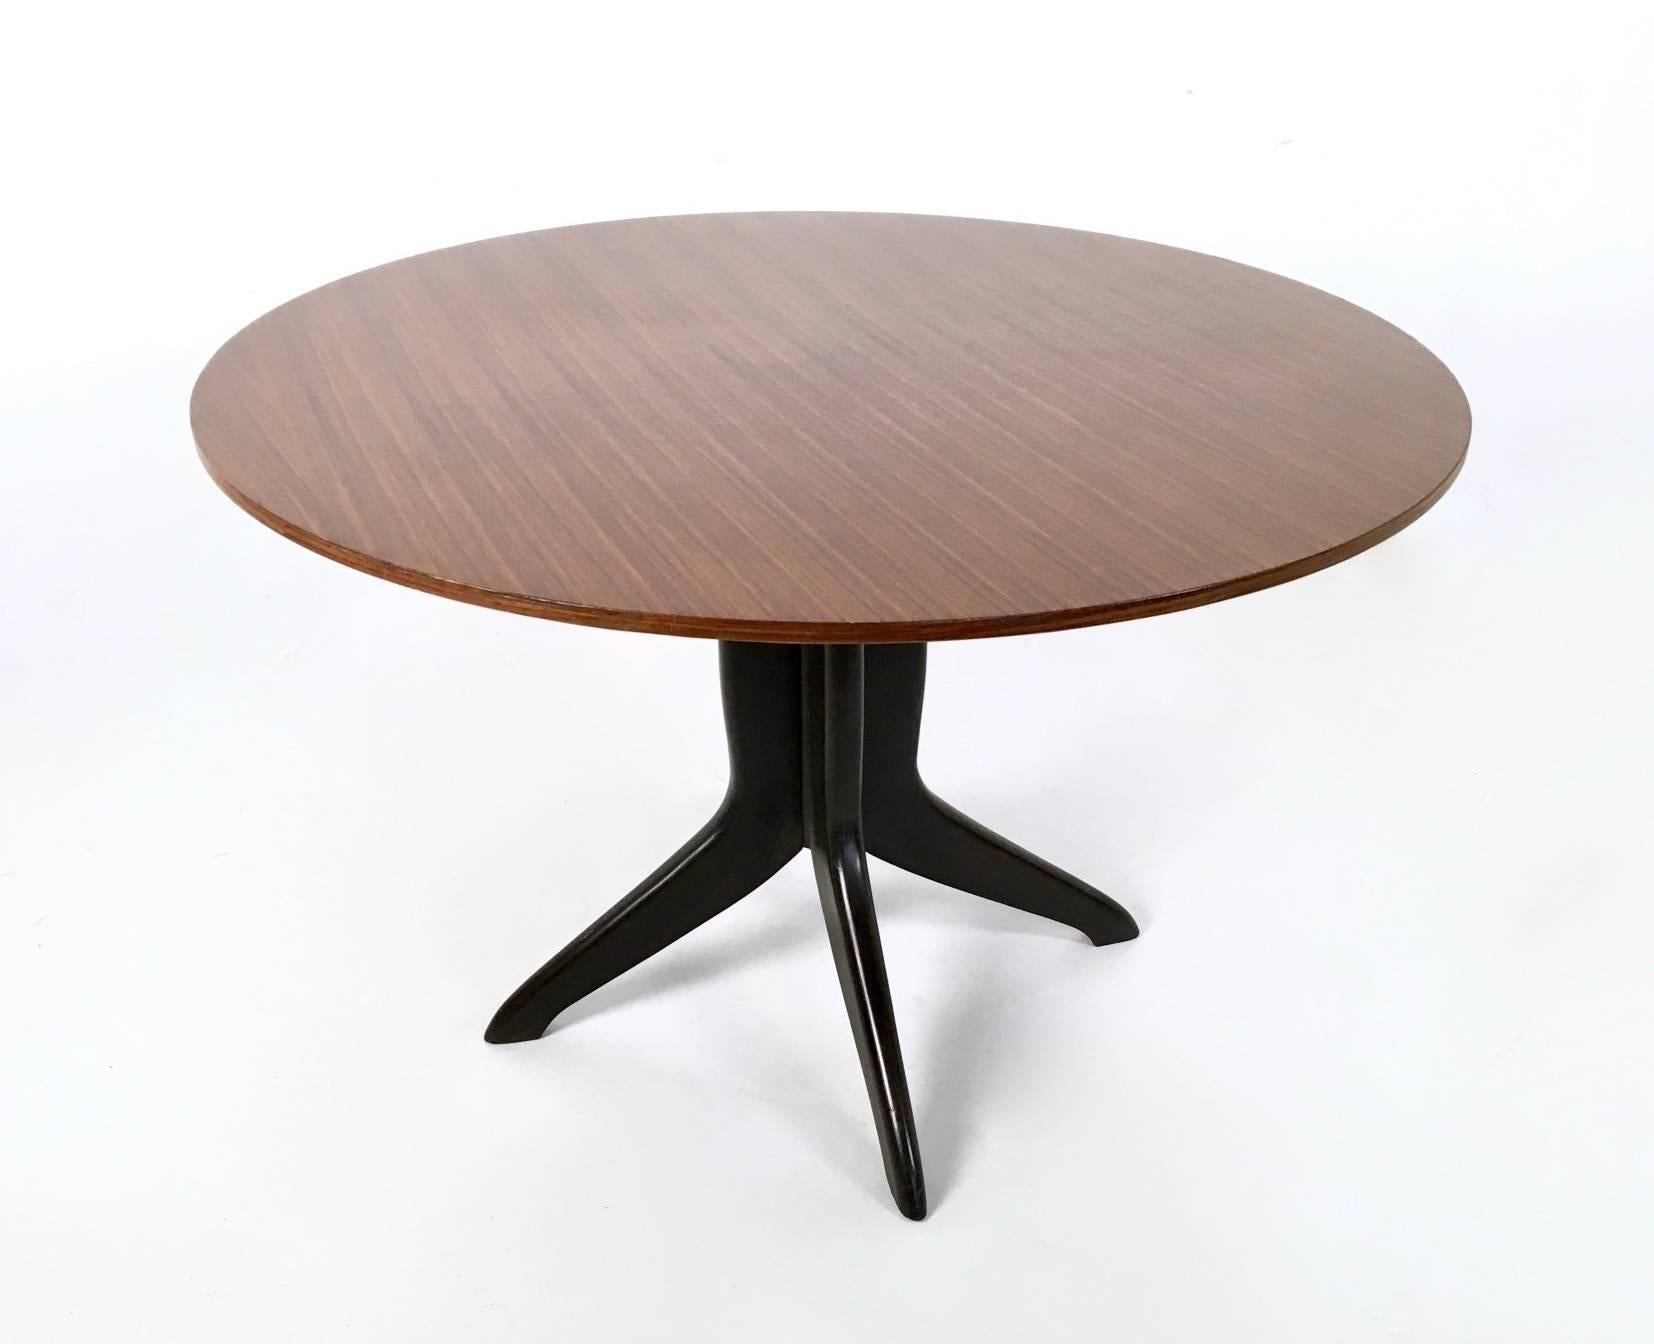 Made in Italy, 1950s.
This beautiful table features an ebonized beech leg and a wooden veneered top. 
It is a vintage piece, therefore it might show slight traces of use, but it can be considered as in excellent original condition and ready to